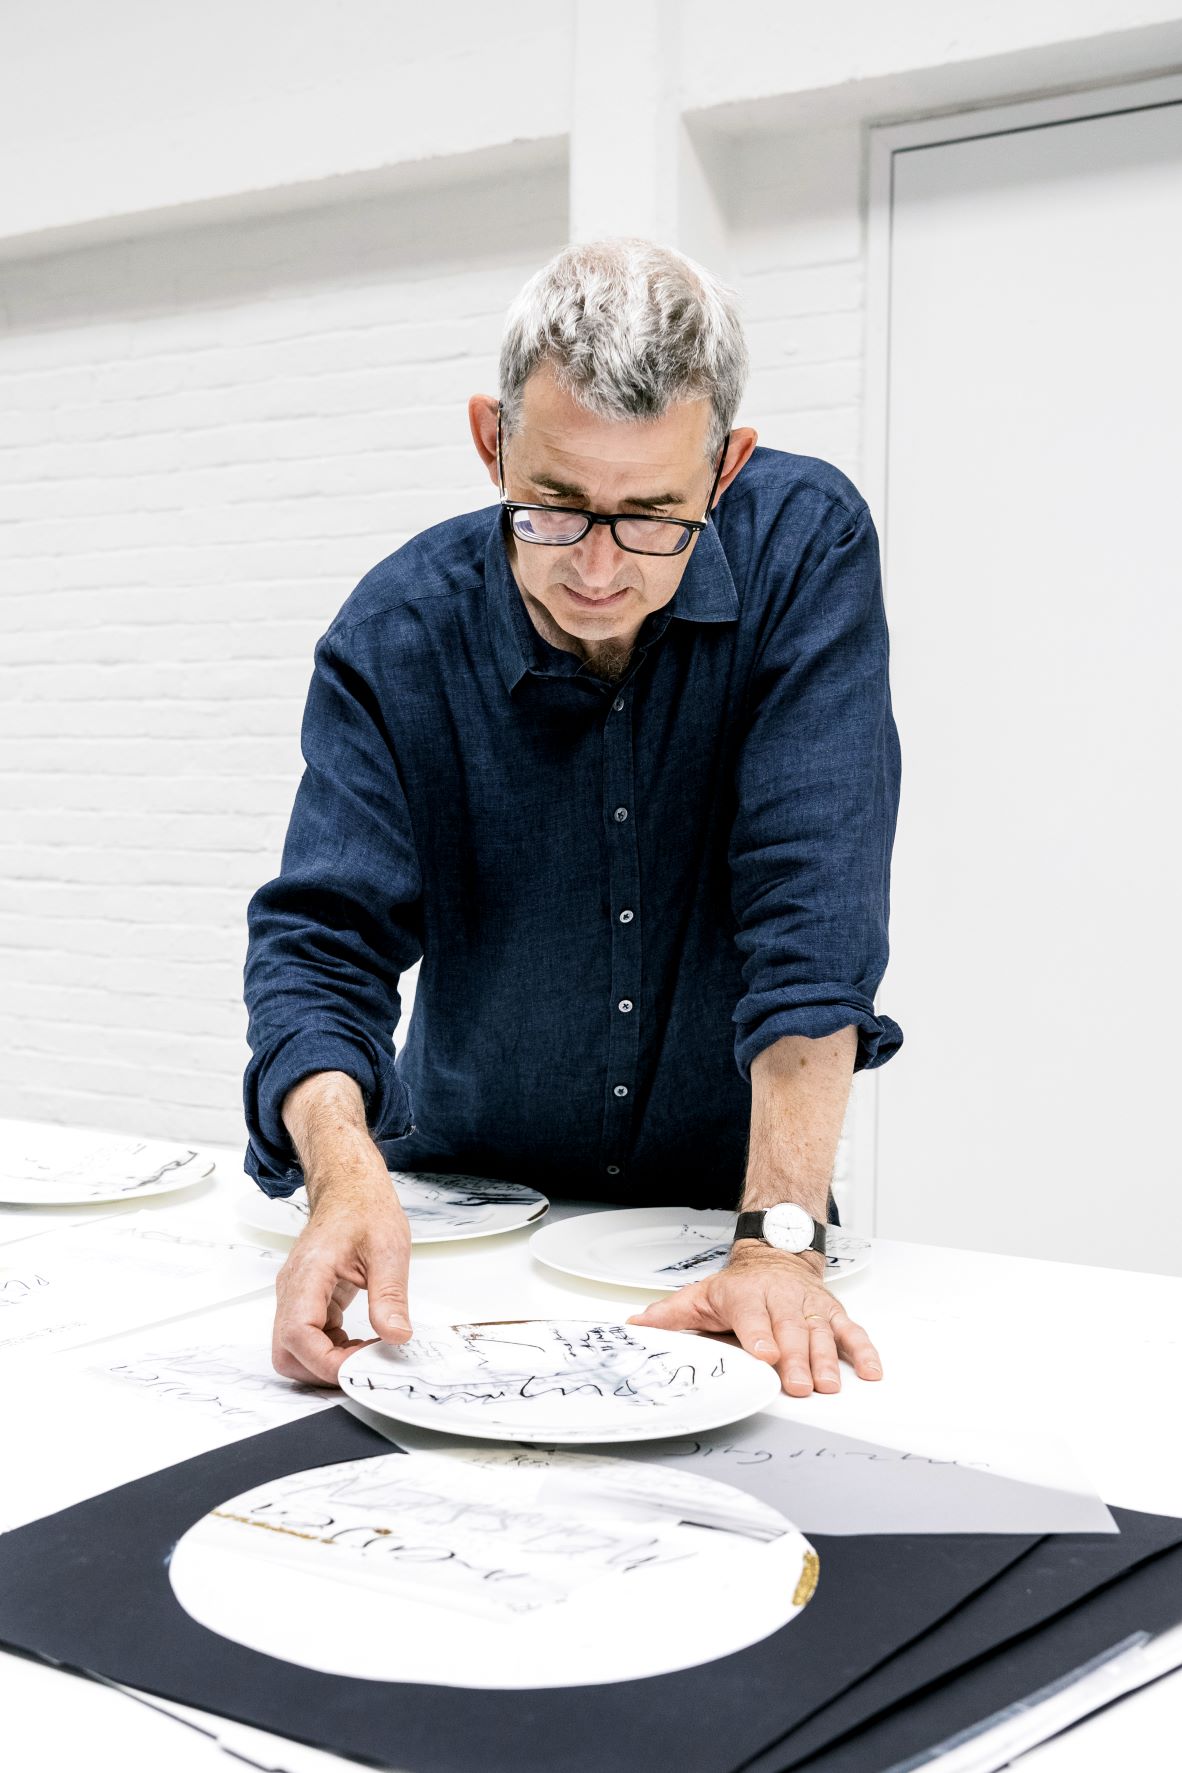 Edmund de Waal examining a plate on a table